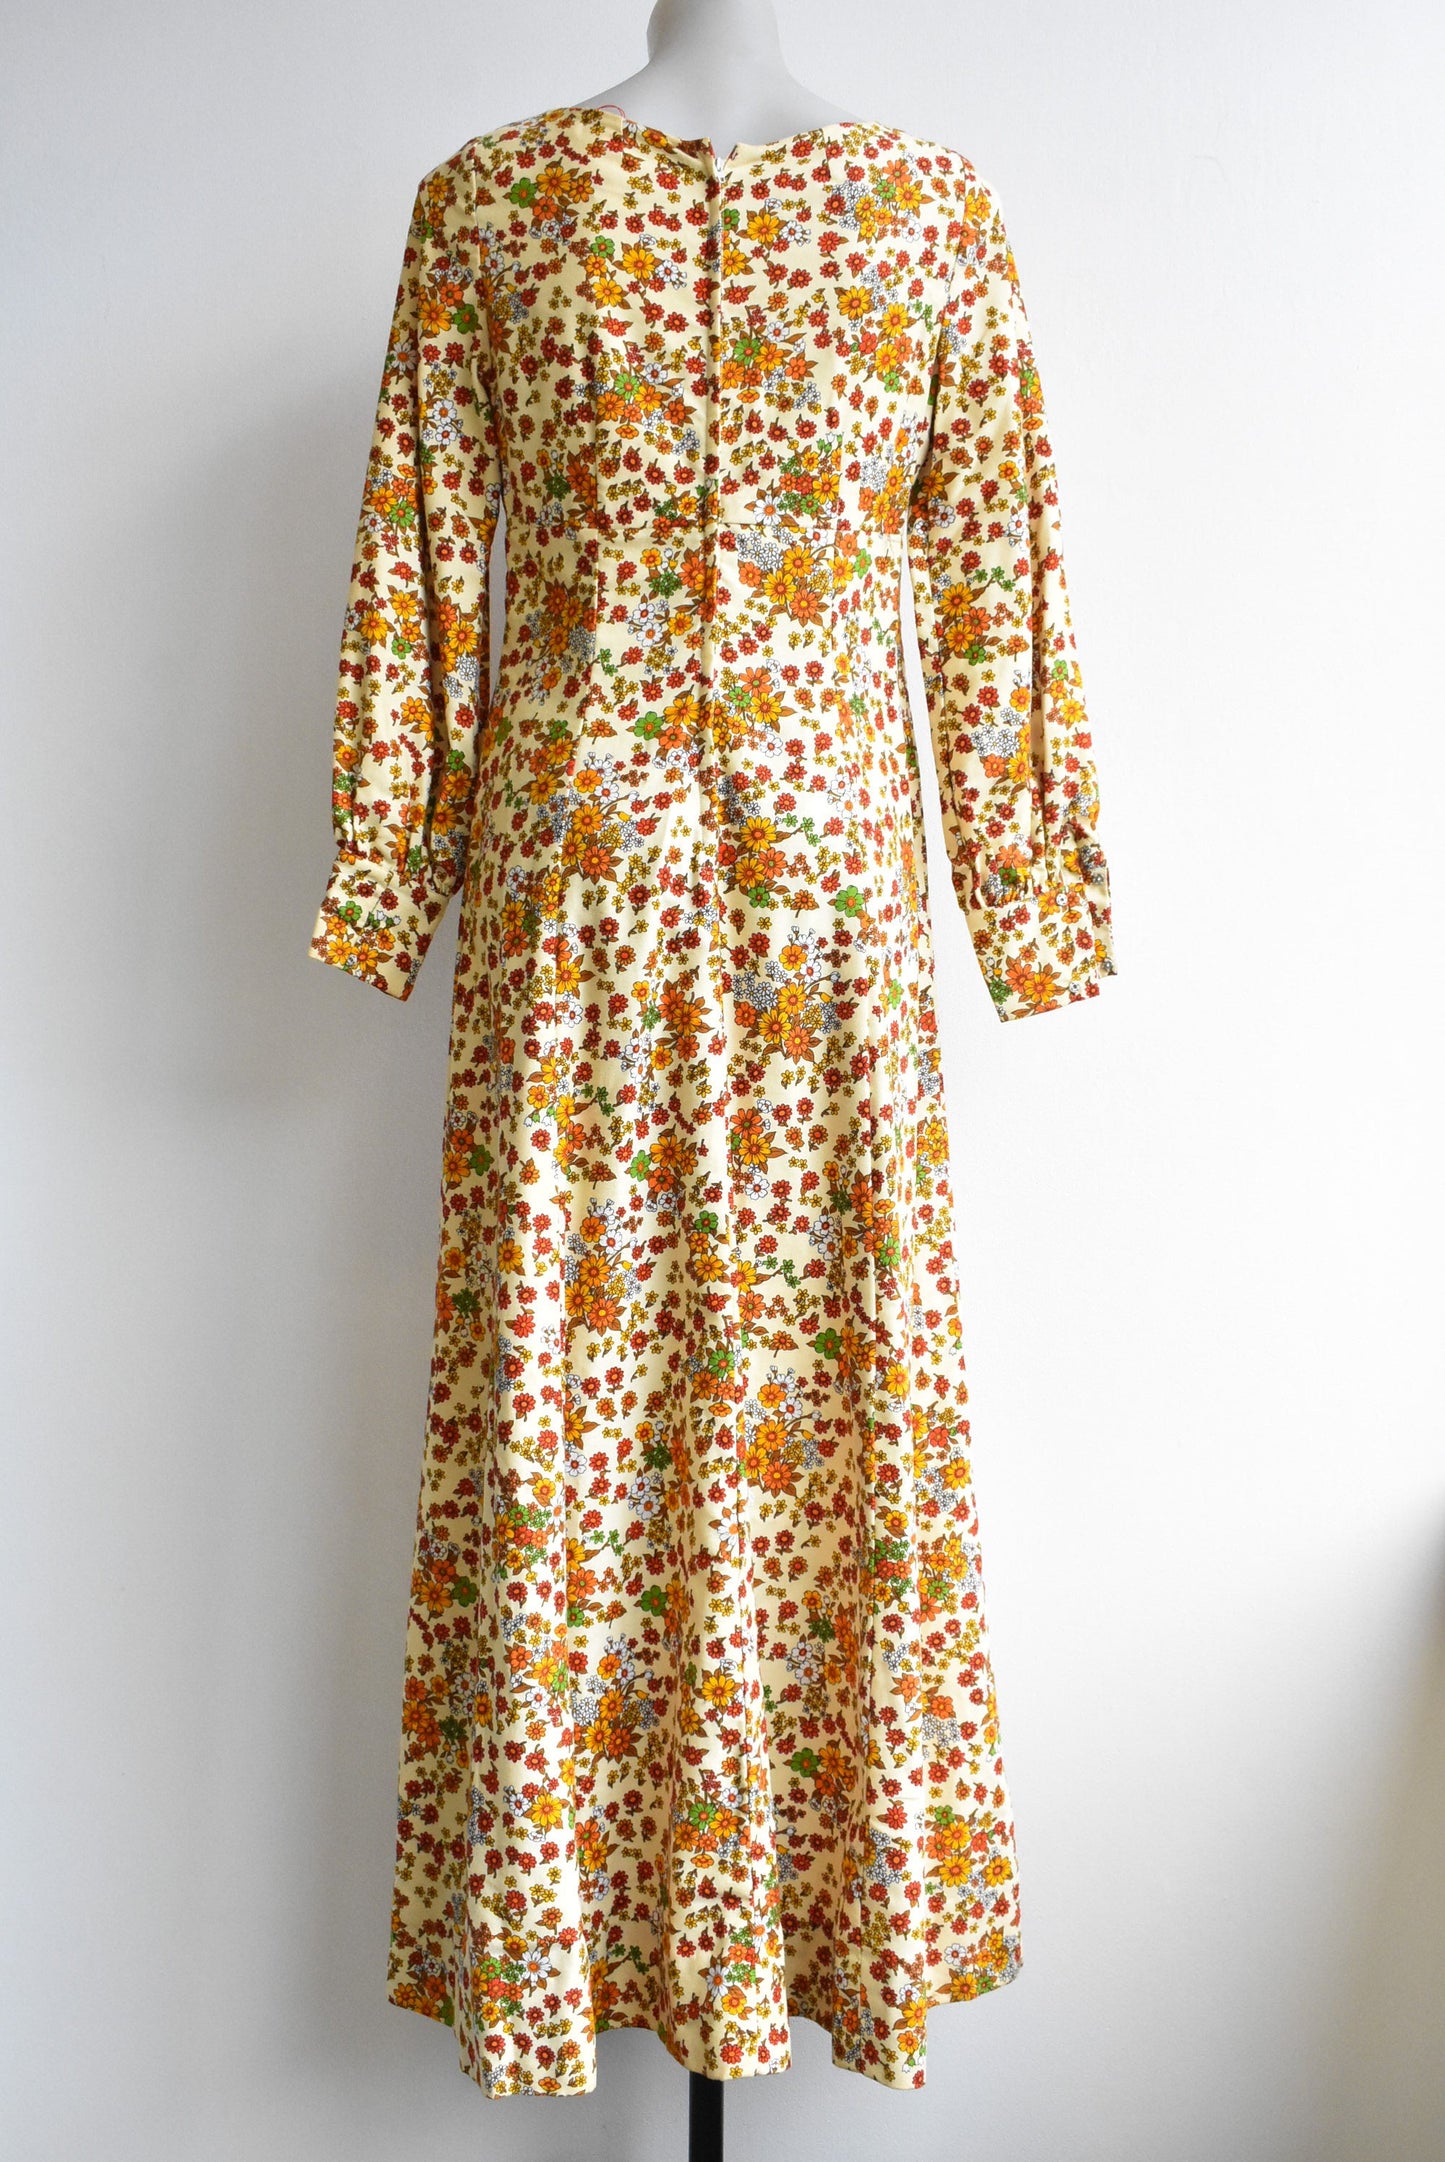 Handmade long floral dress/possible bed gown